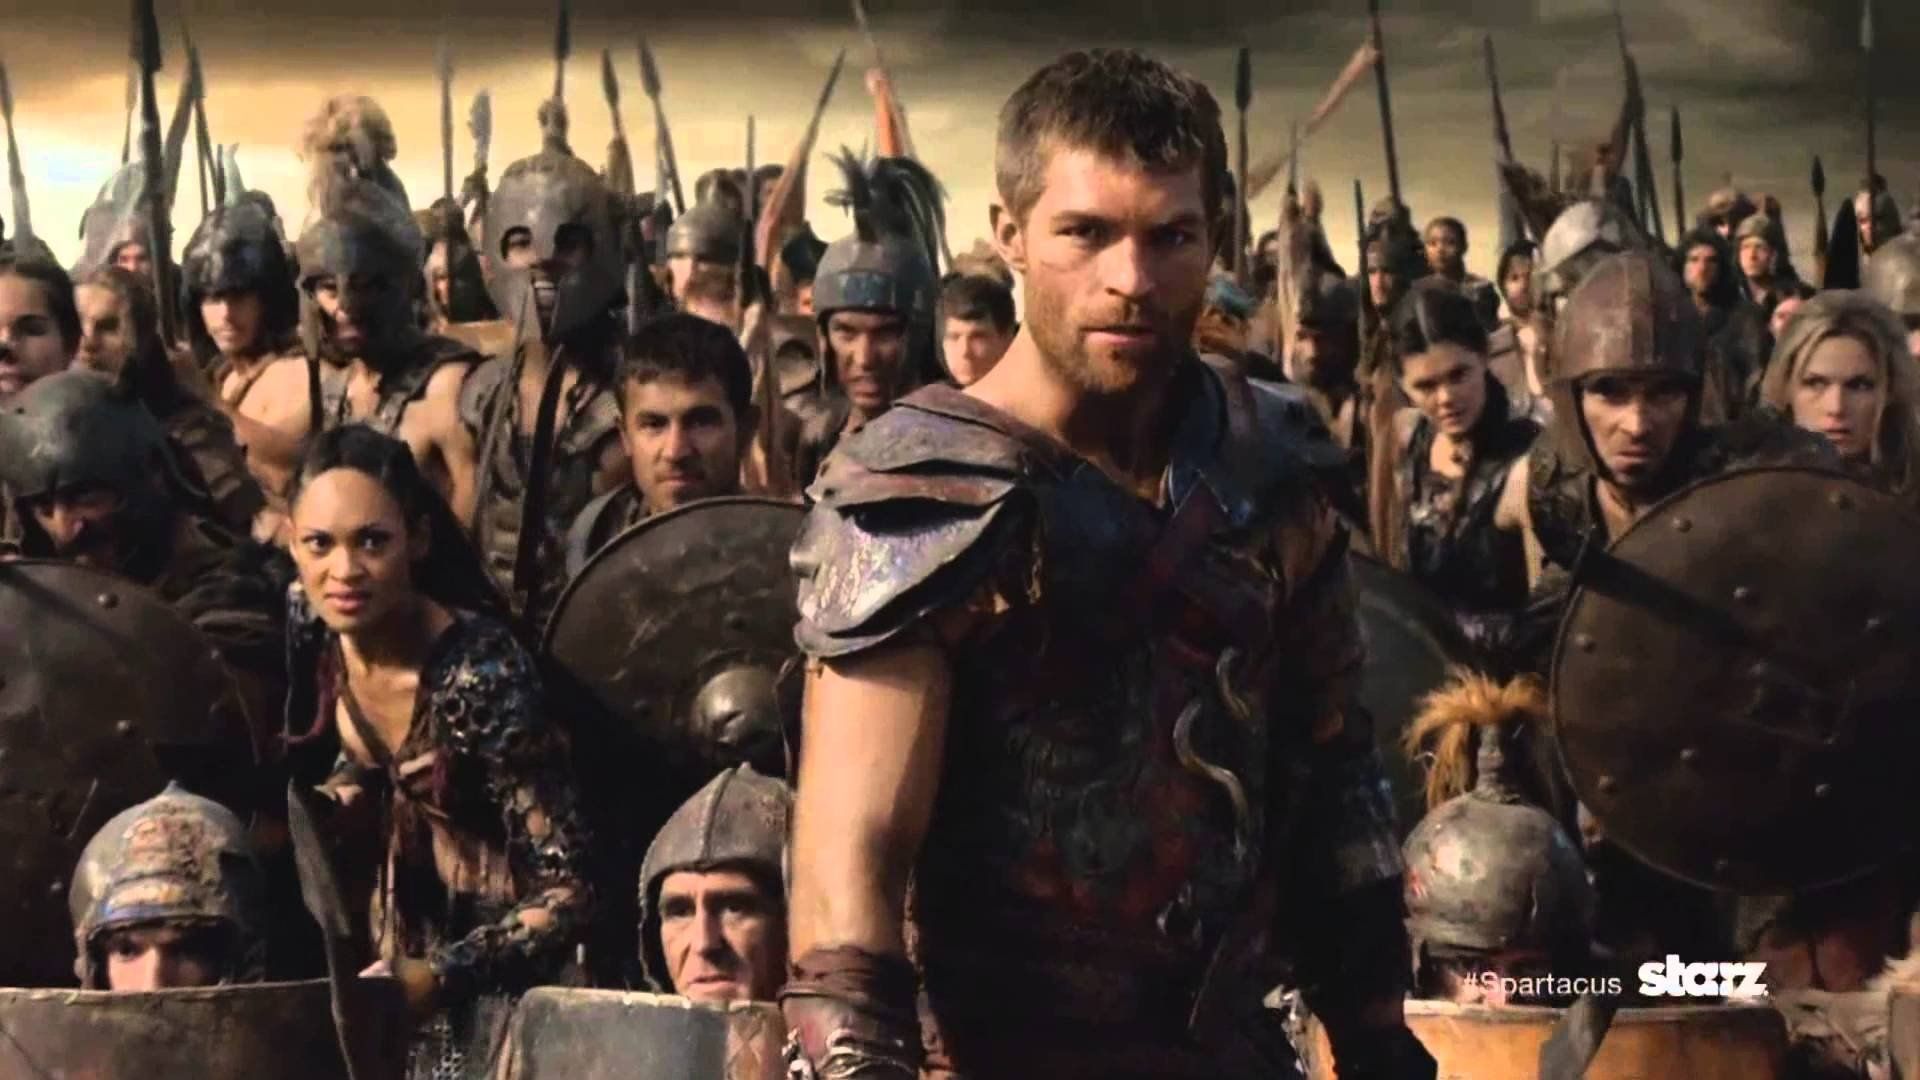 Spartacus Wallpaper Hd - Spartacus War Of The Damned Hd , HD Wallpaper & Backgrounds